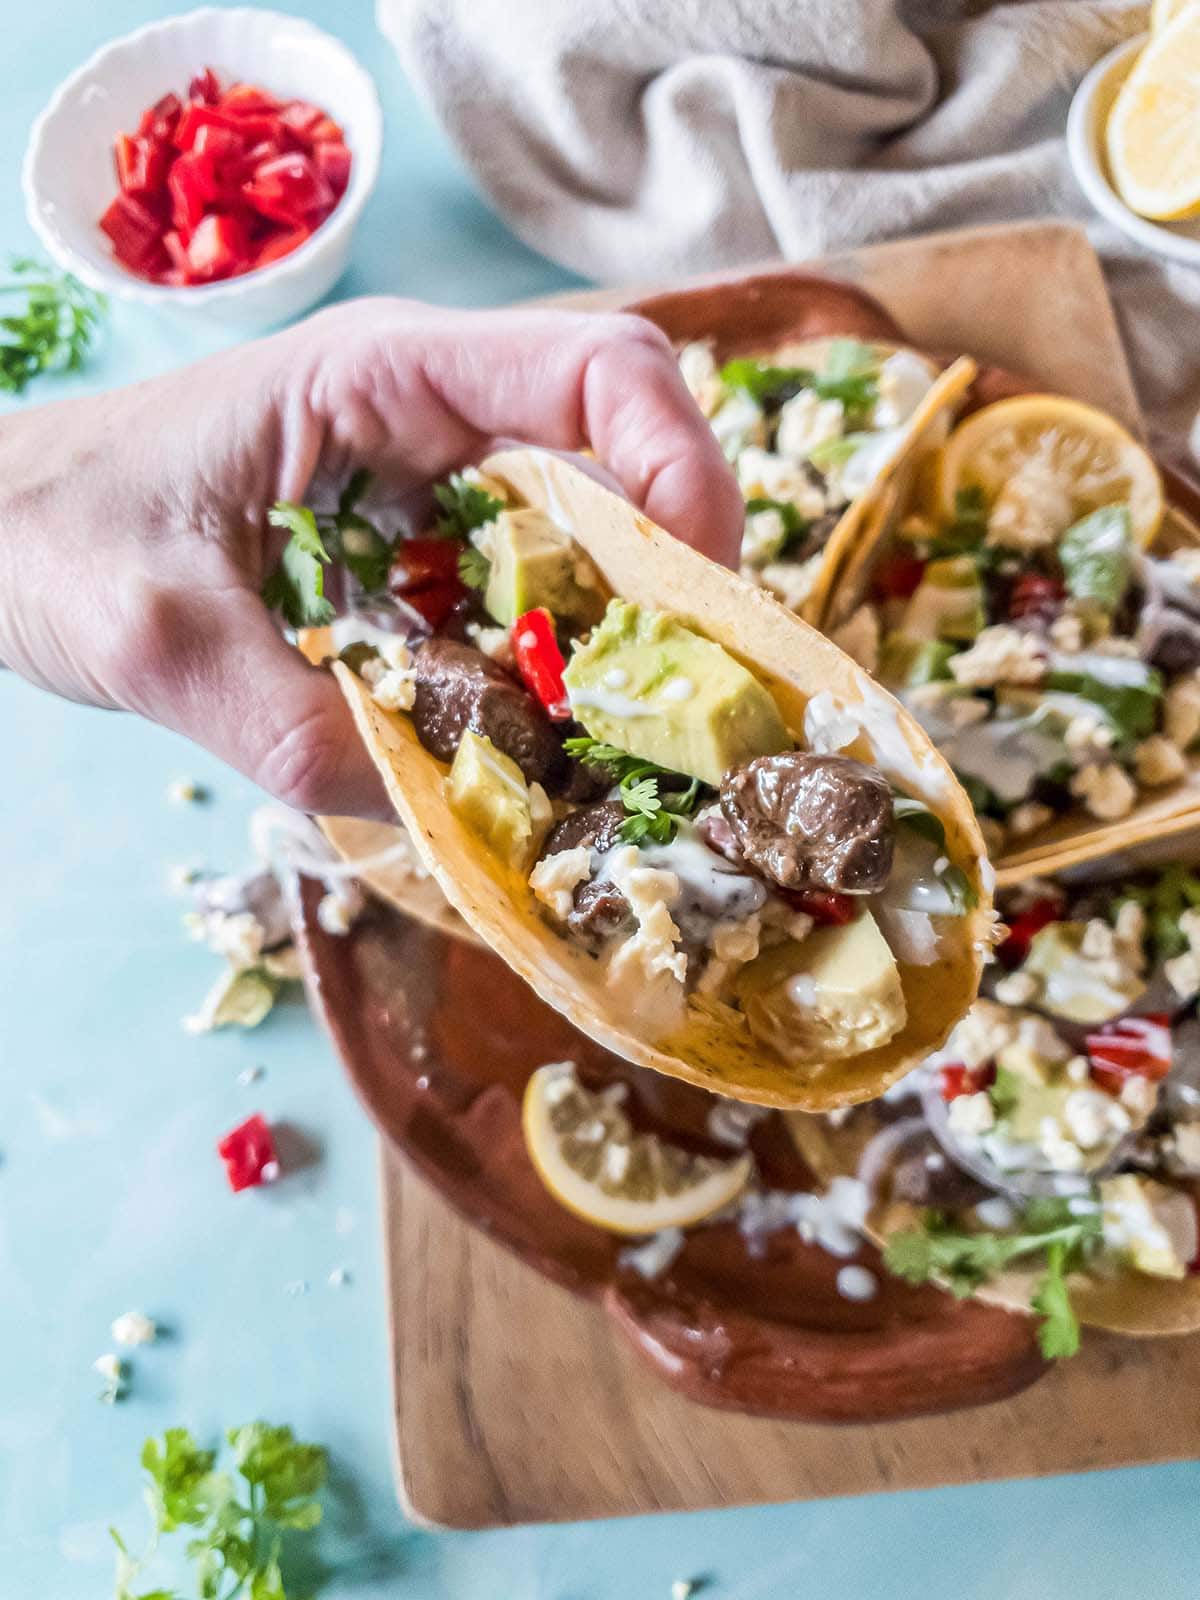 A woman's hand holding fresh beef taco, ready to eat.